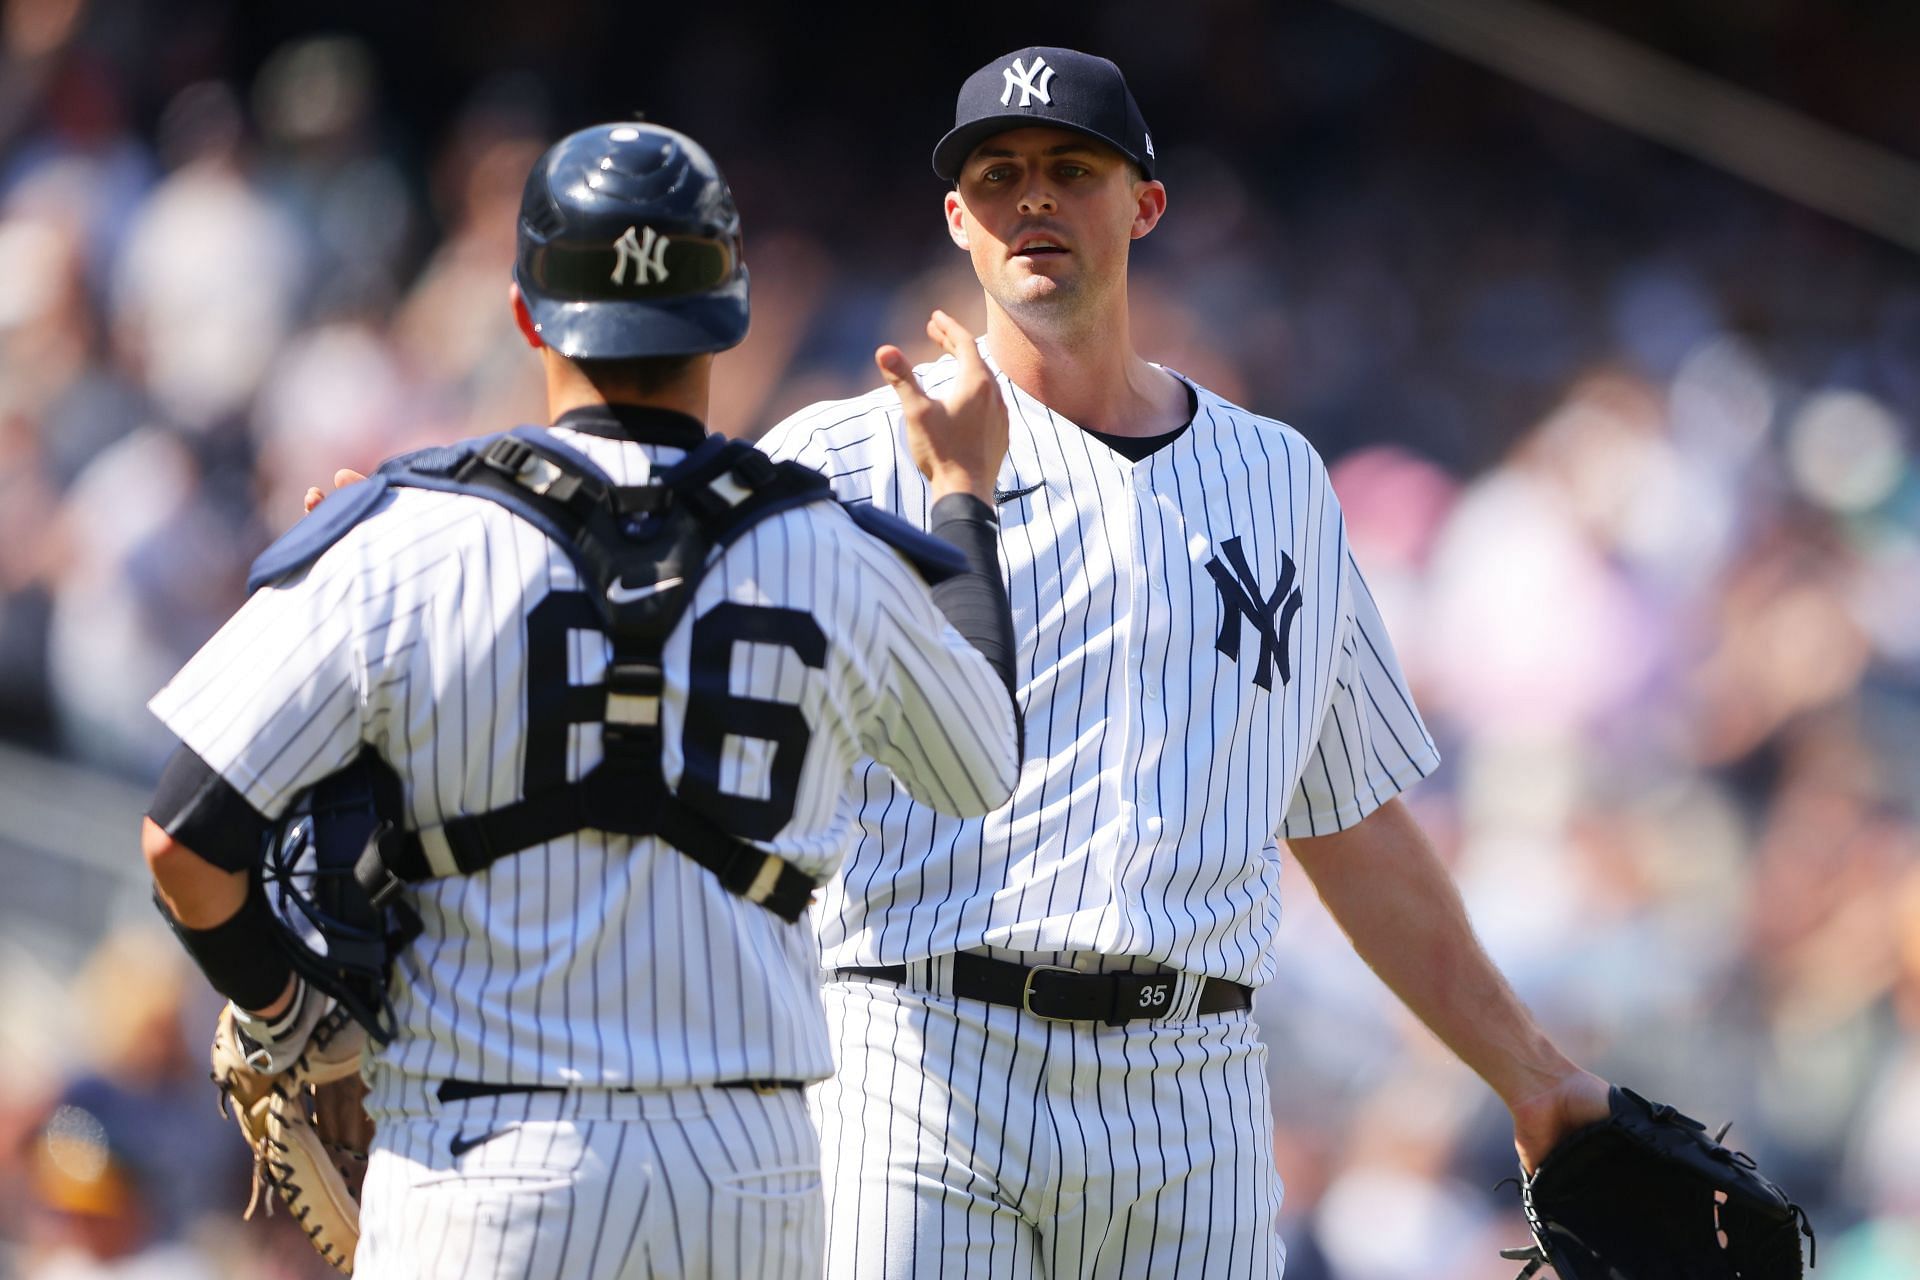 Bleeding Yankee Blue: WHY WOULD THE YANKEES TRADE FOR ANOTHER HURT